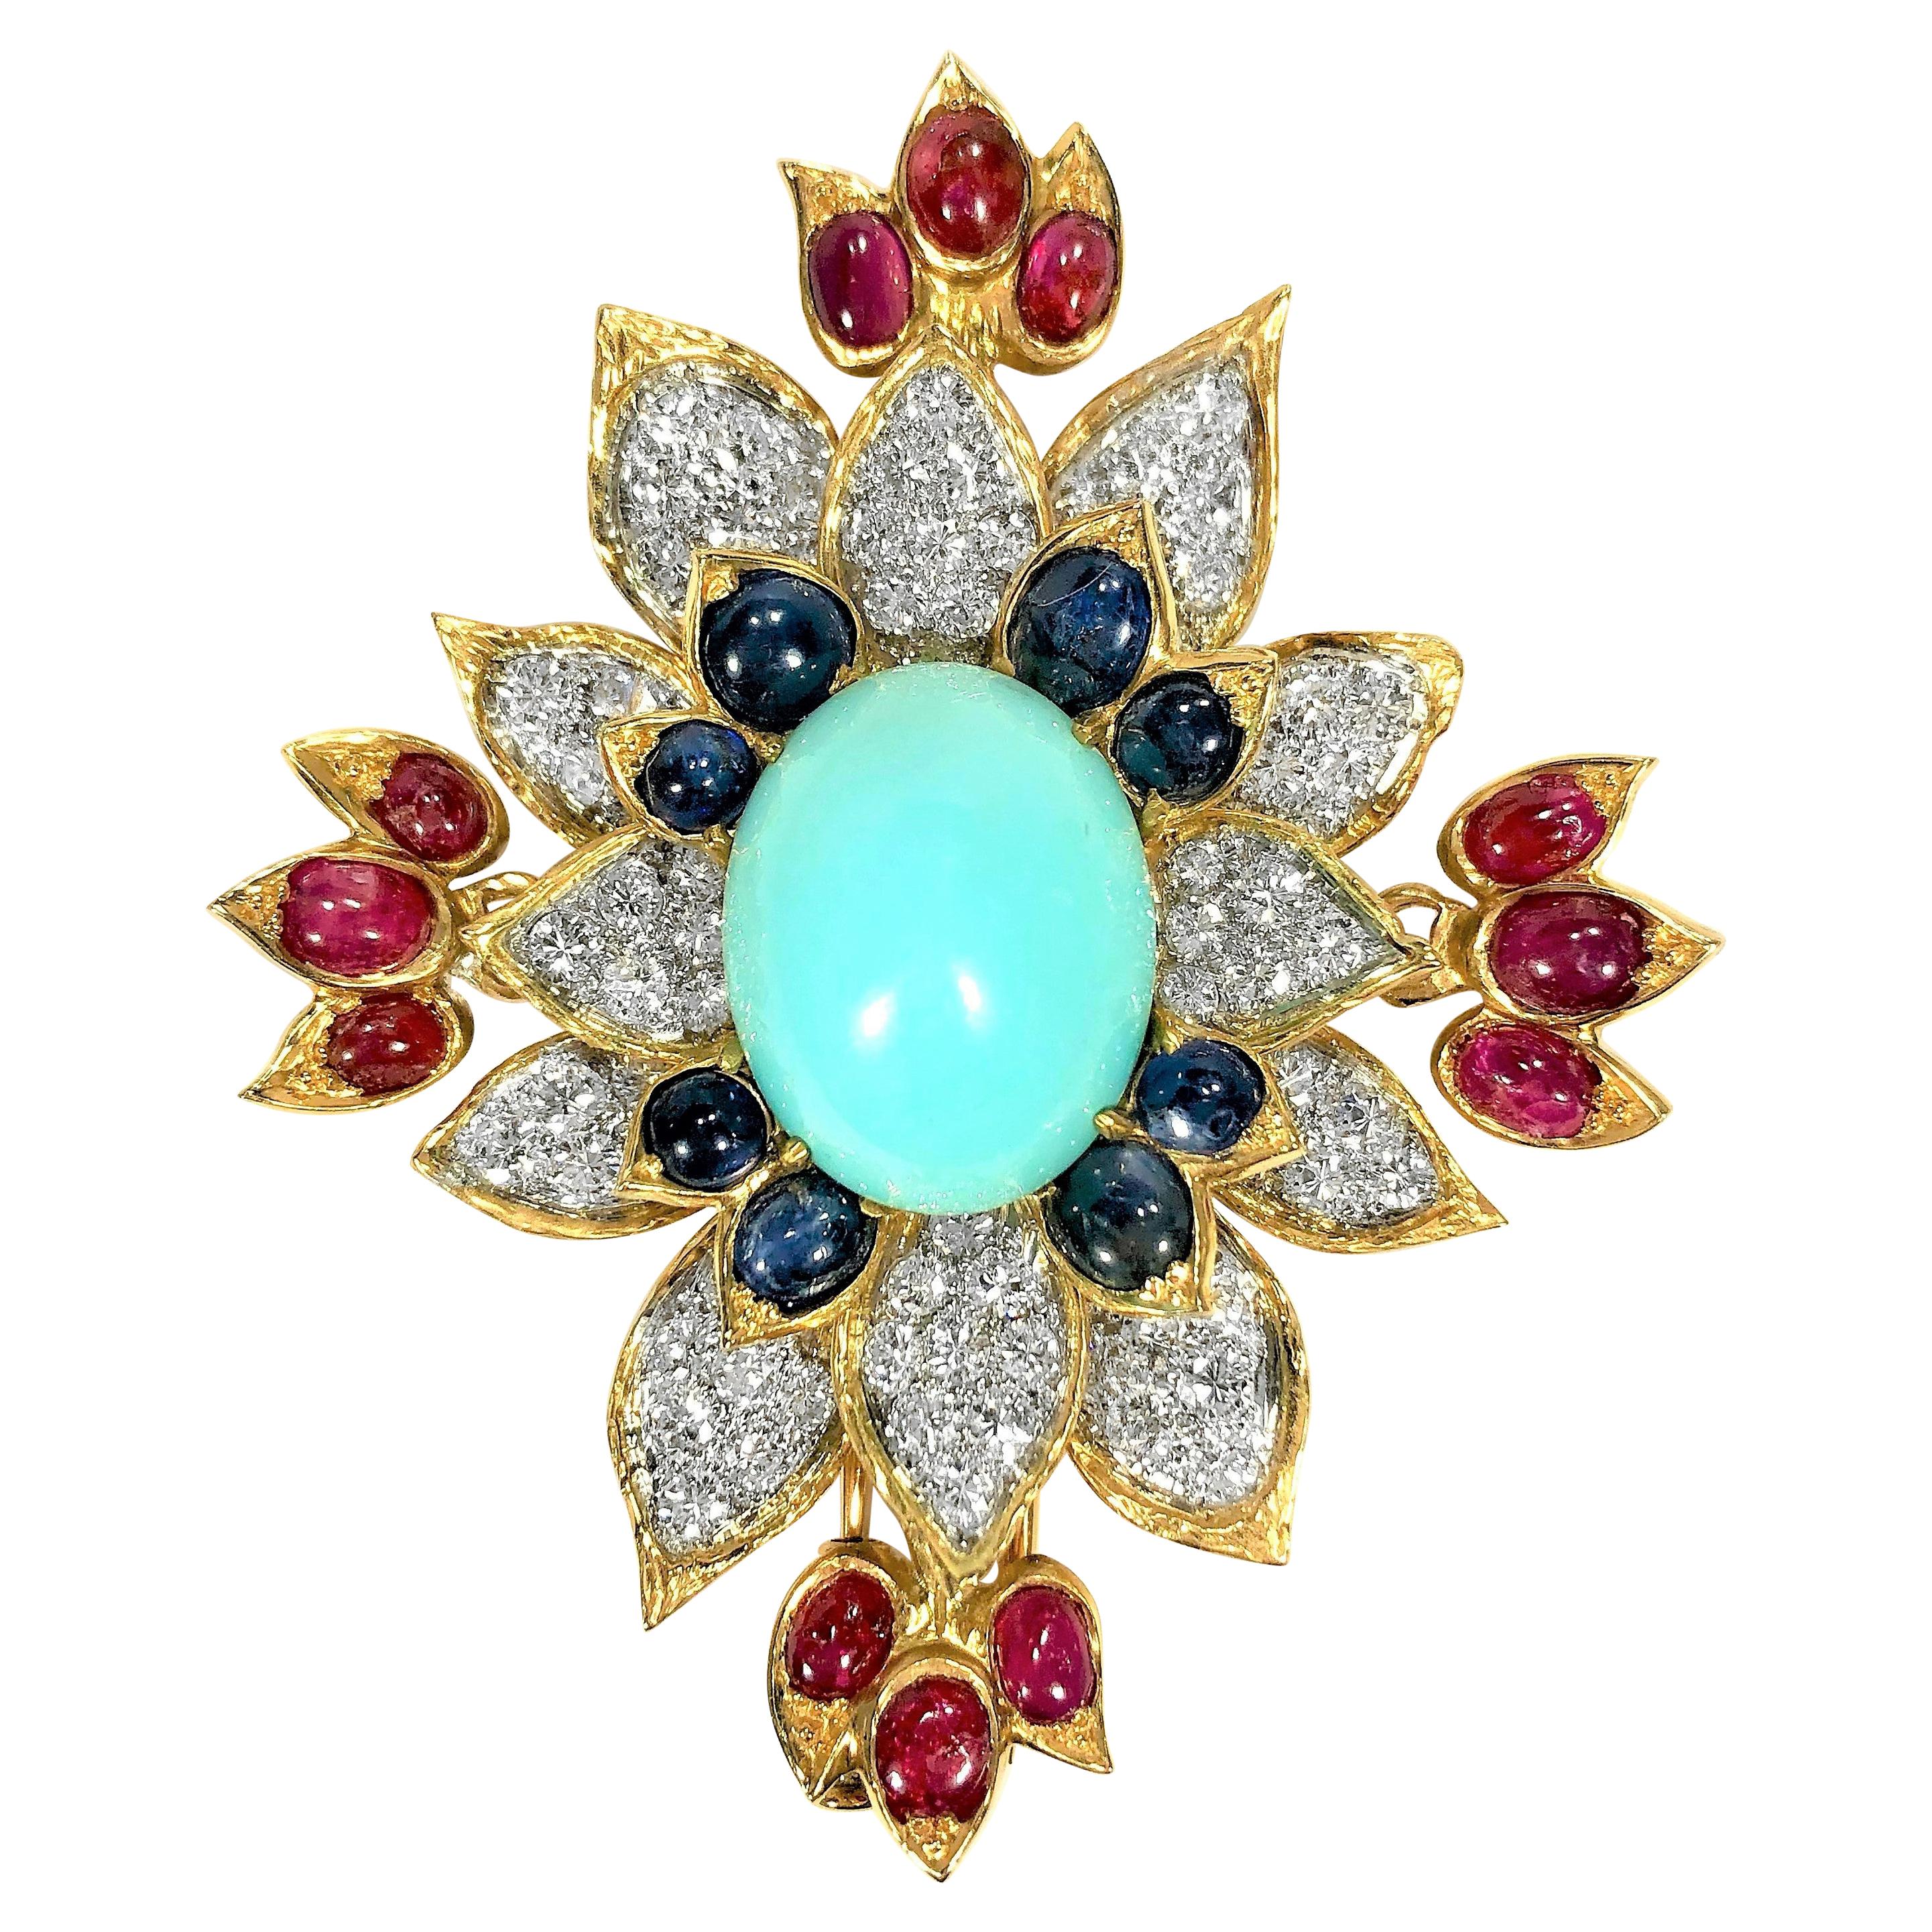 French Gold, Turquoise, Diamond, Ruby, and Sapphire Brooch by Jean-Thierry Bondt